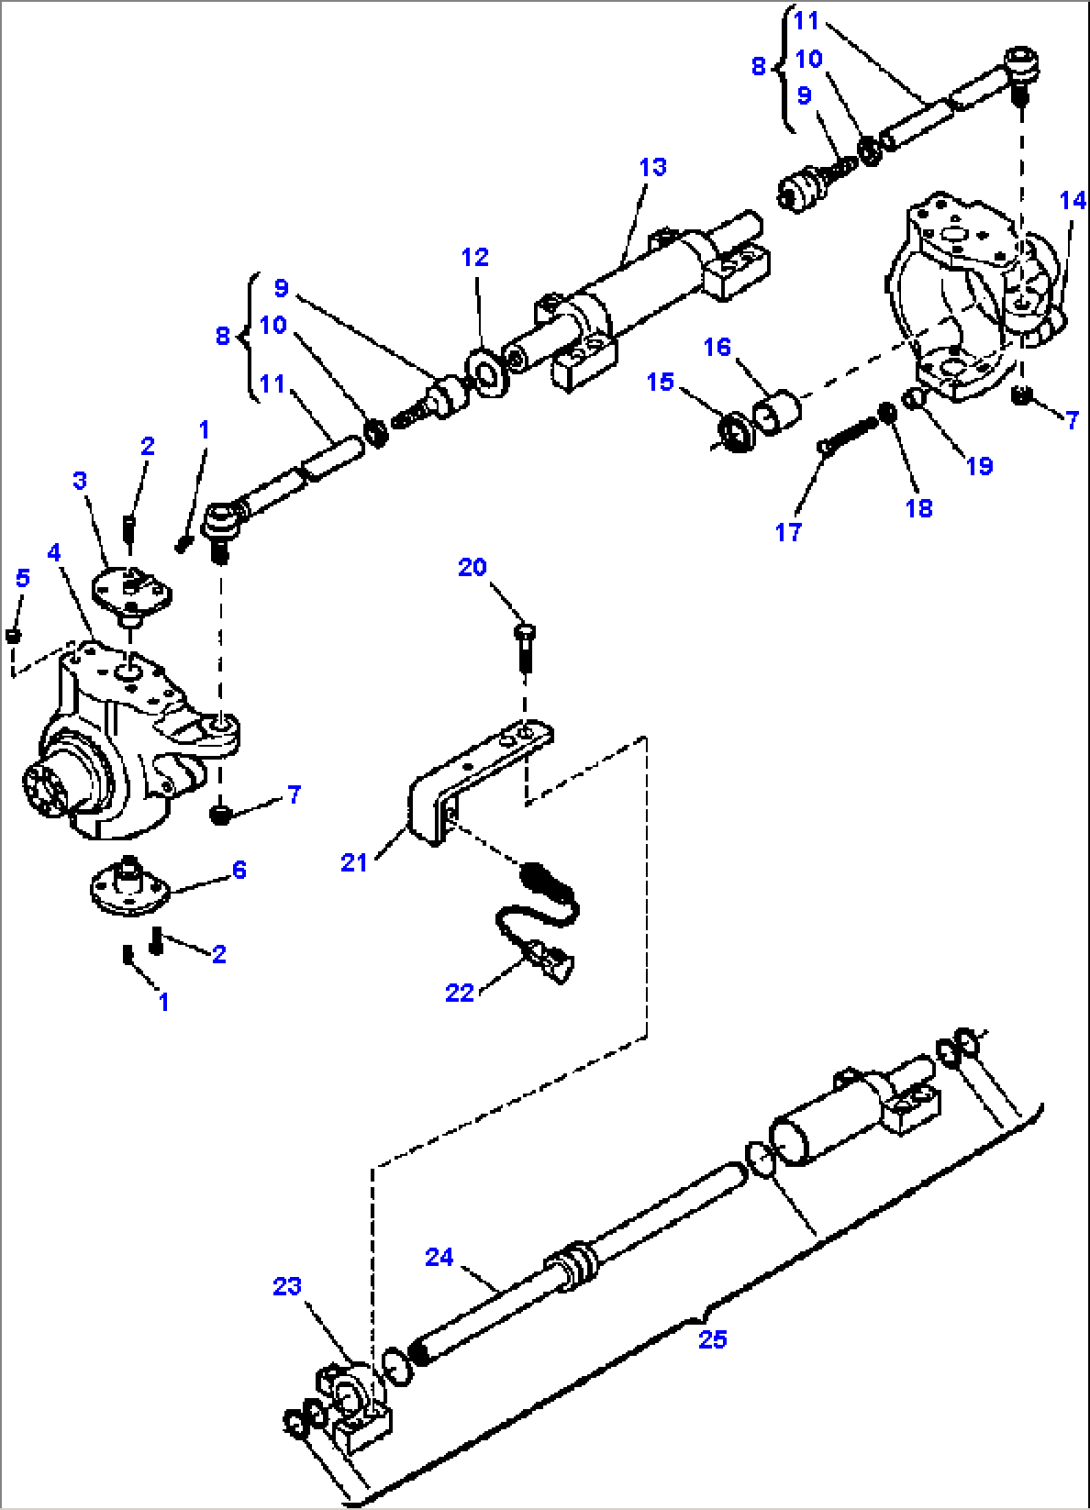 FIG. F3405-03A0 FRONT AXLE (4WD) - STEERING ARM